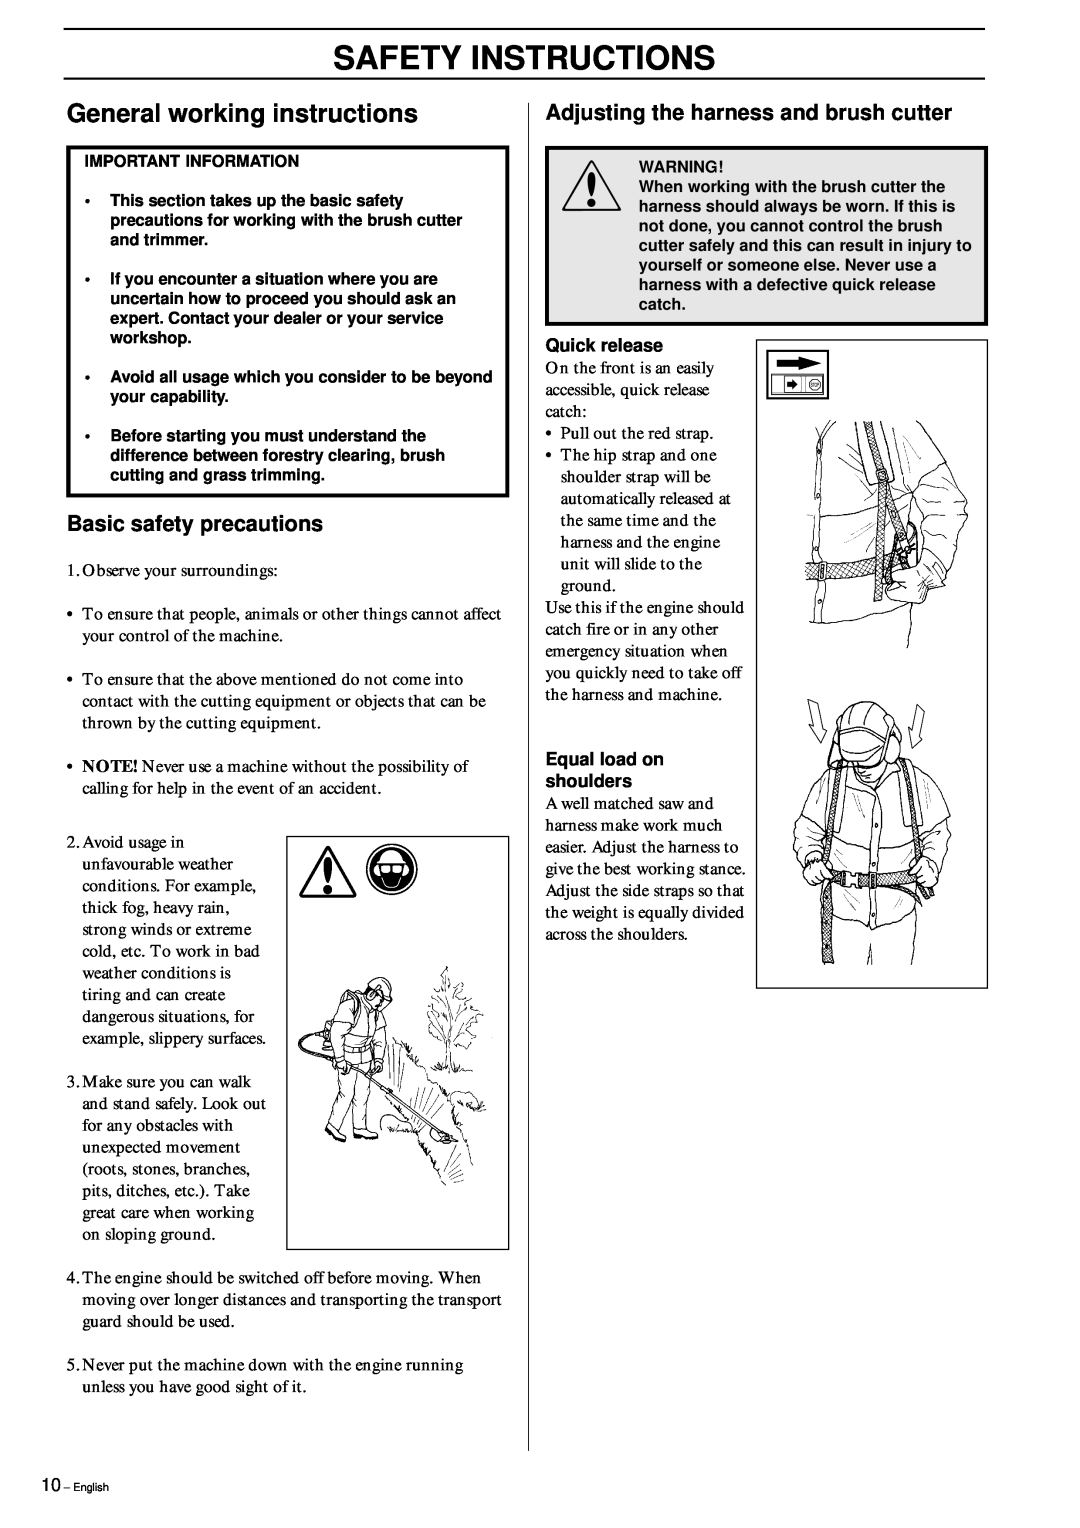 Husqvarna 152RB manual General working instructions, Basic safety precautions, Adjusting the harness and brush cutter 